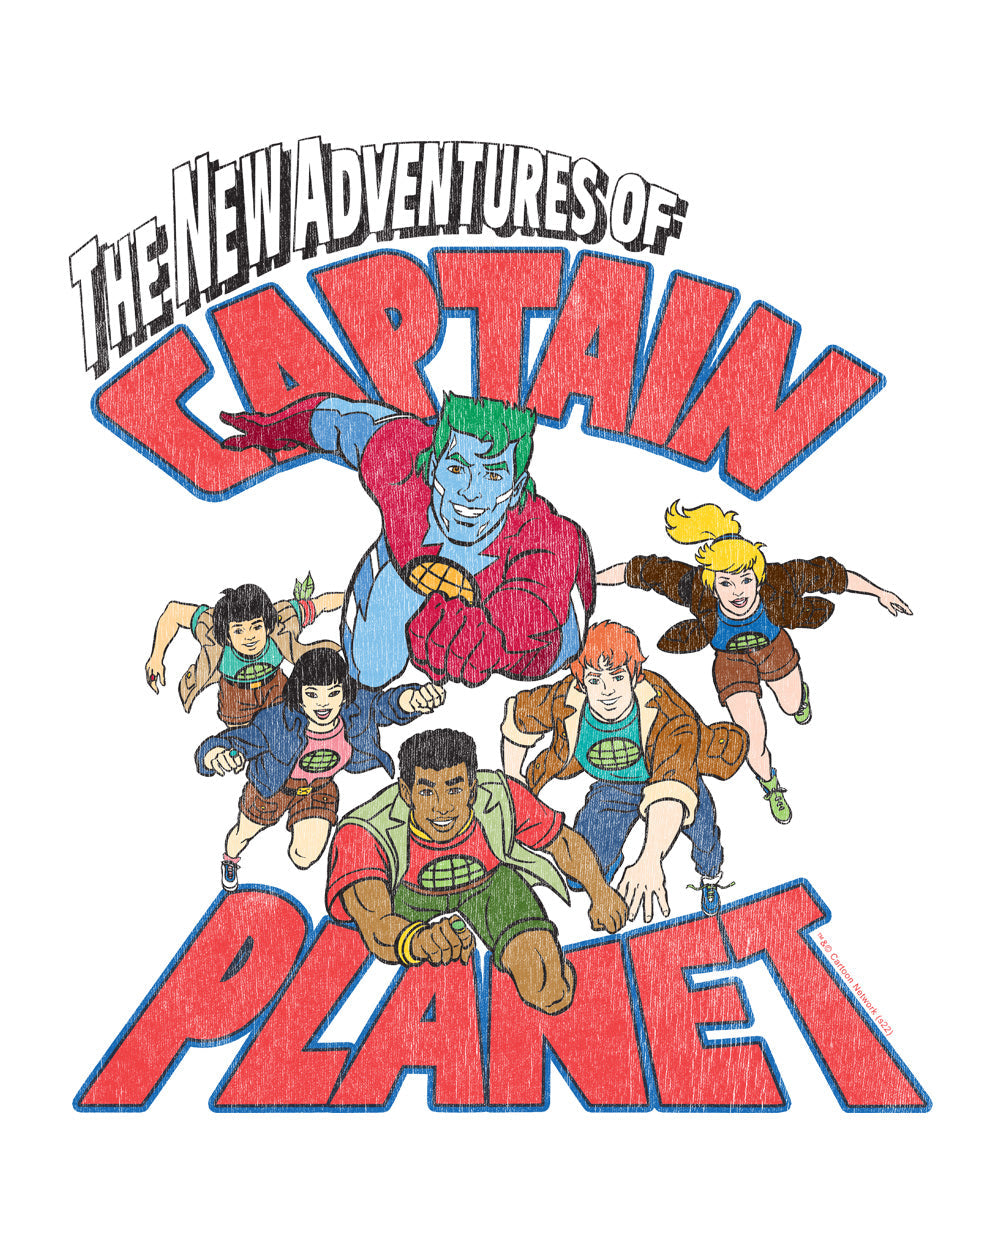 Captain Planet & The Planeteers Officially Licensed Retro Vintage 90s Superhero Cartoon Cotton T-Shirt